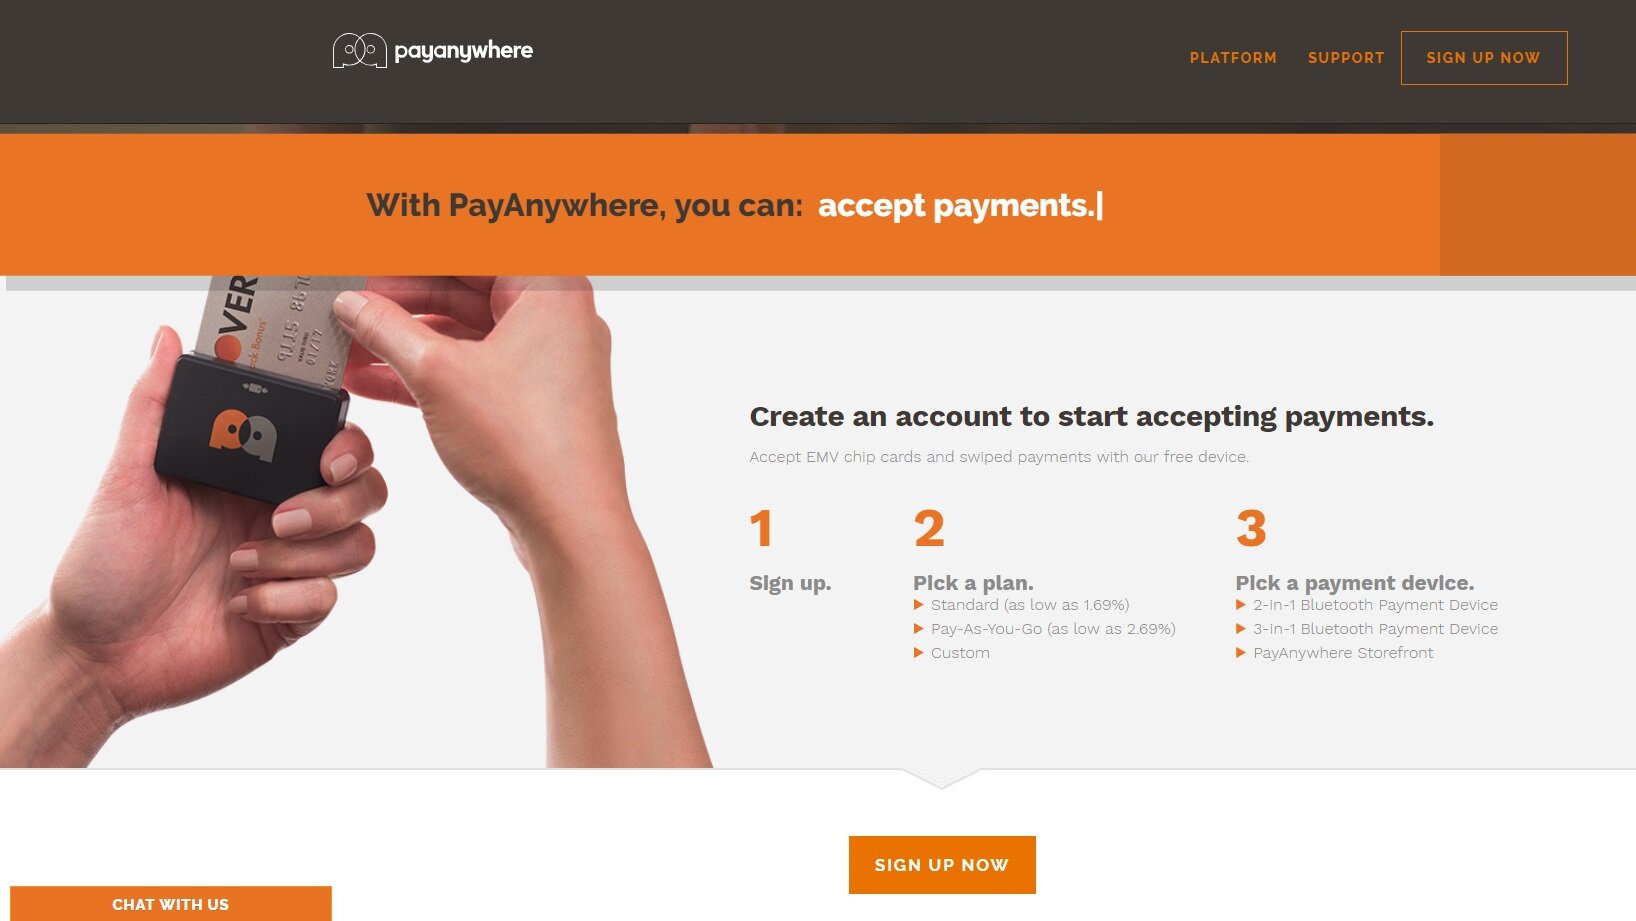 Smartphone Credit Card Reader by Payanywhere